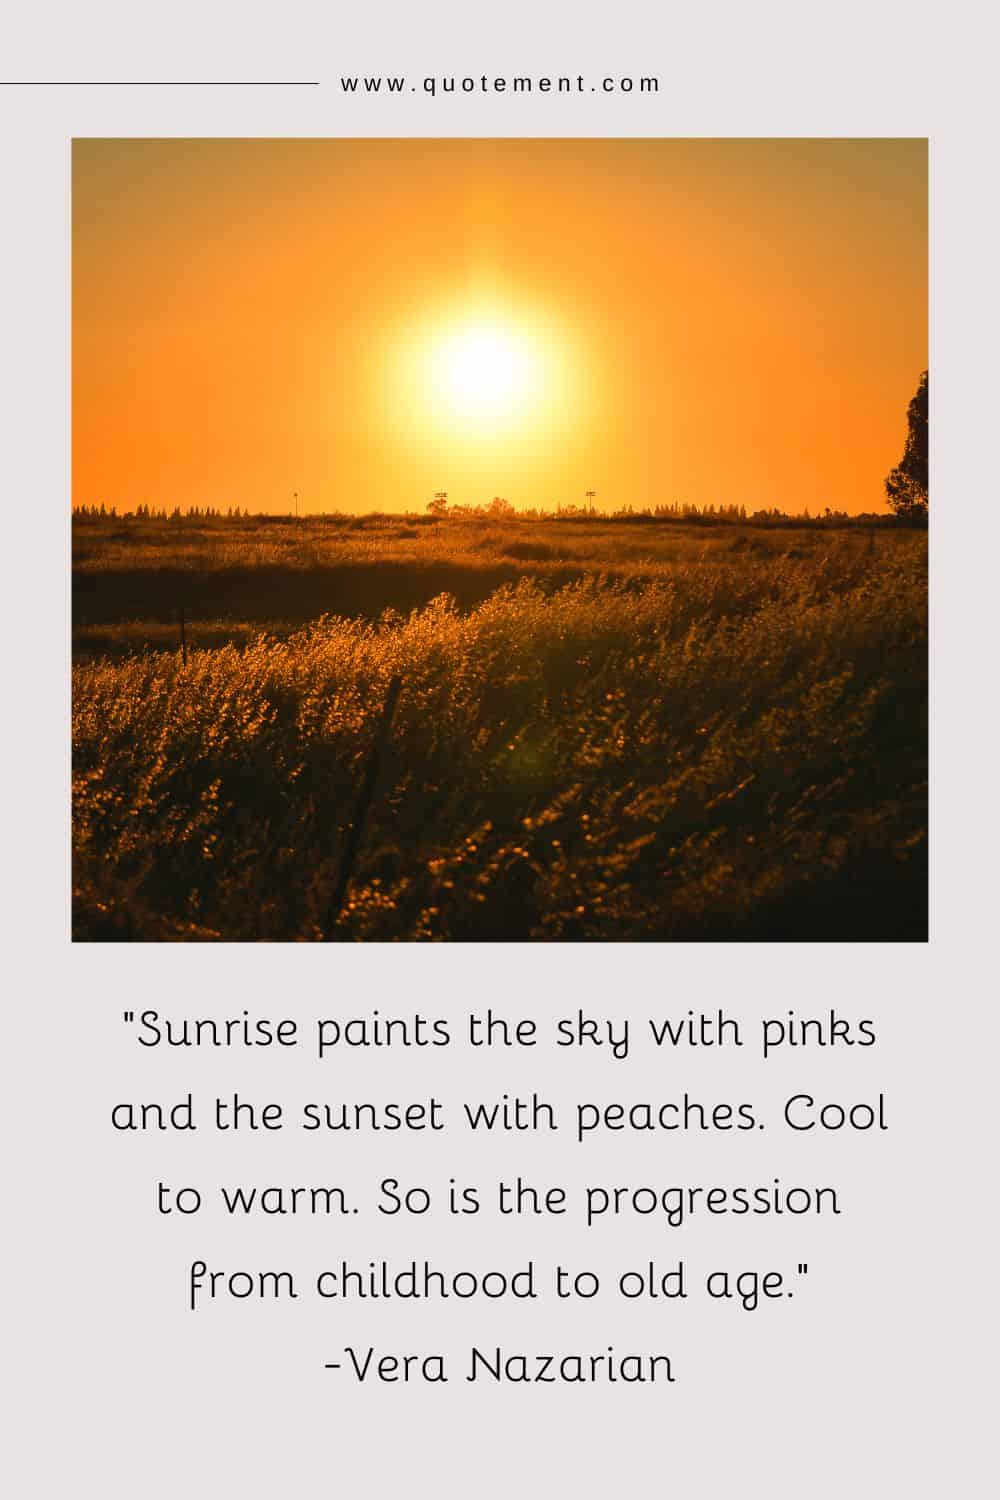 Sunrise paints the sky with pinks and the sunset with peaches. Cool to warm. So is the progression from childhood to old age